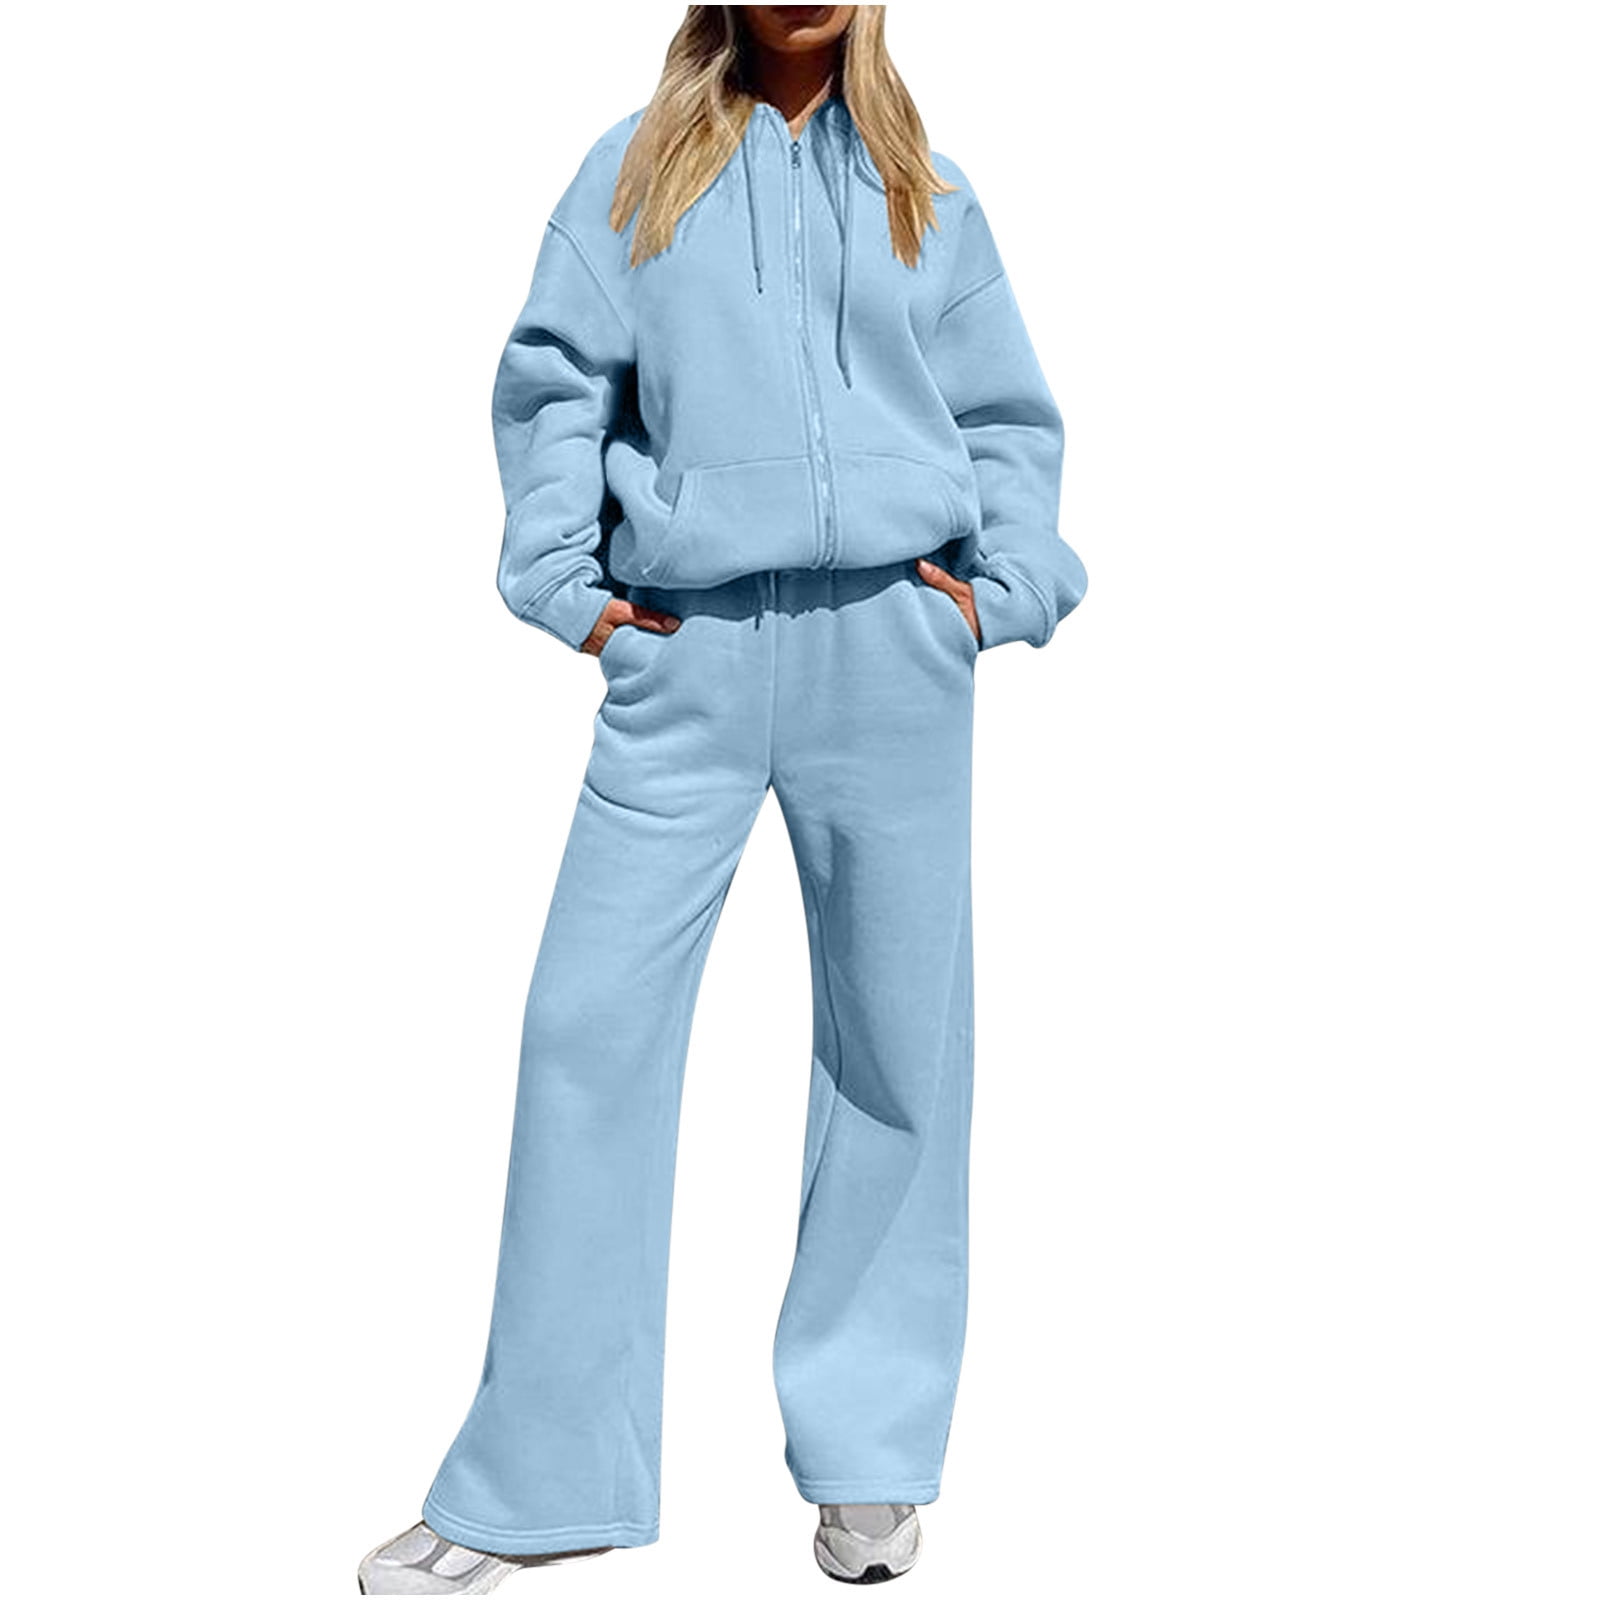 AOOCHASLIY Sweat Suits for Women Clearance Jogging Suits Sweater